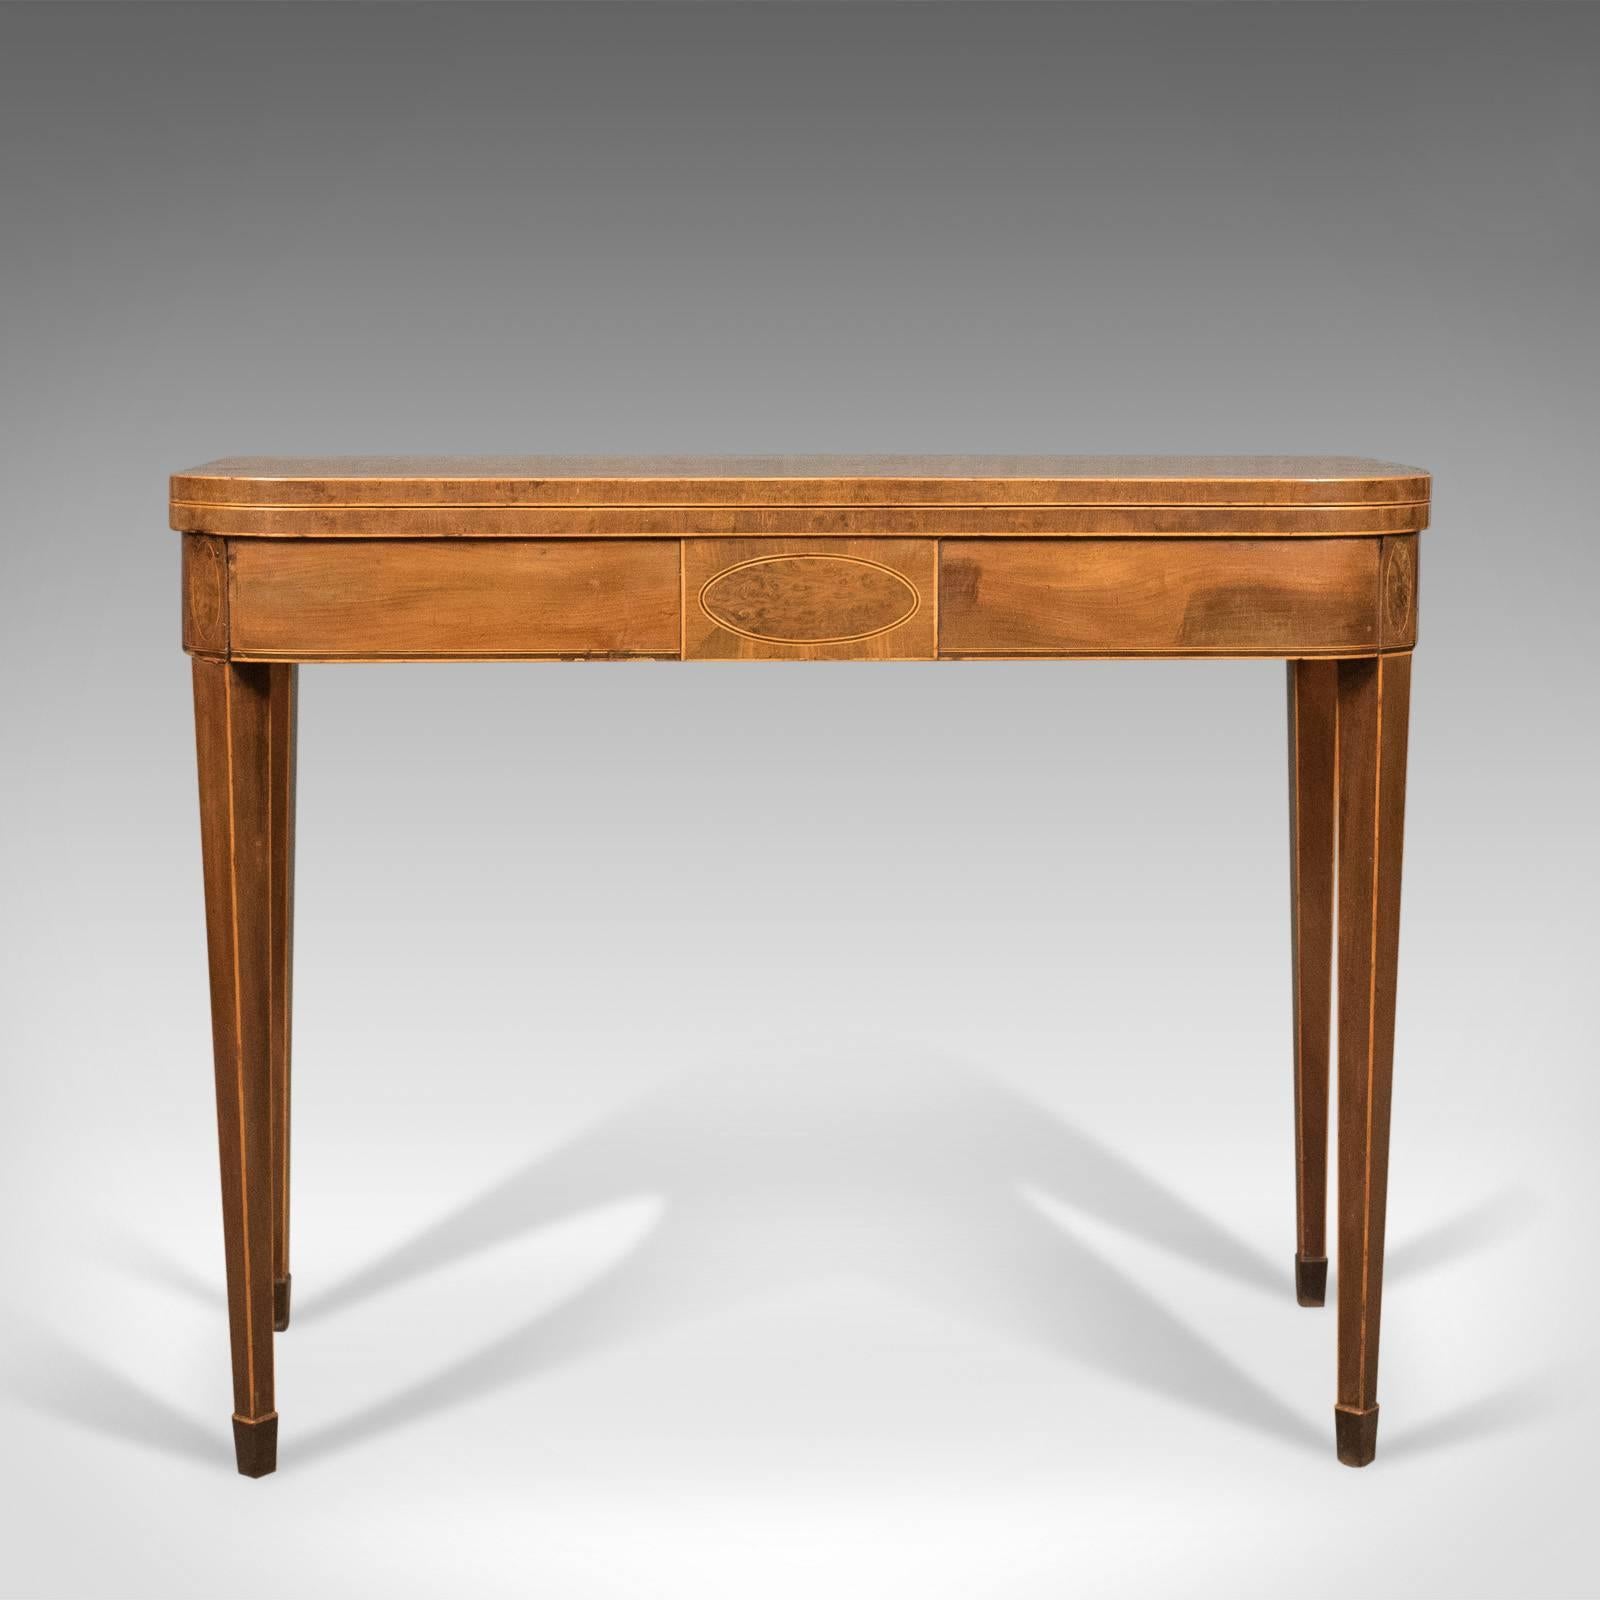 This is an antique fold-over tea table in thuya wood. A late Georgian, English piece dating to the late 18th century circa 1780.

Rare to find and displaying beautifully
Attractive 'bird's-eye' grain detail in a wax polished finish
Good color